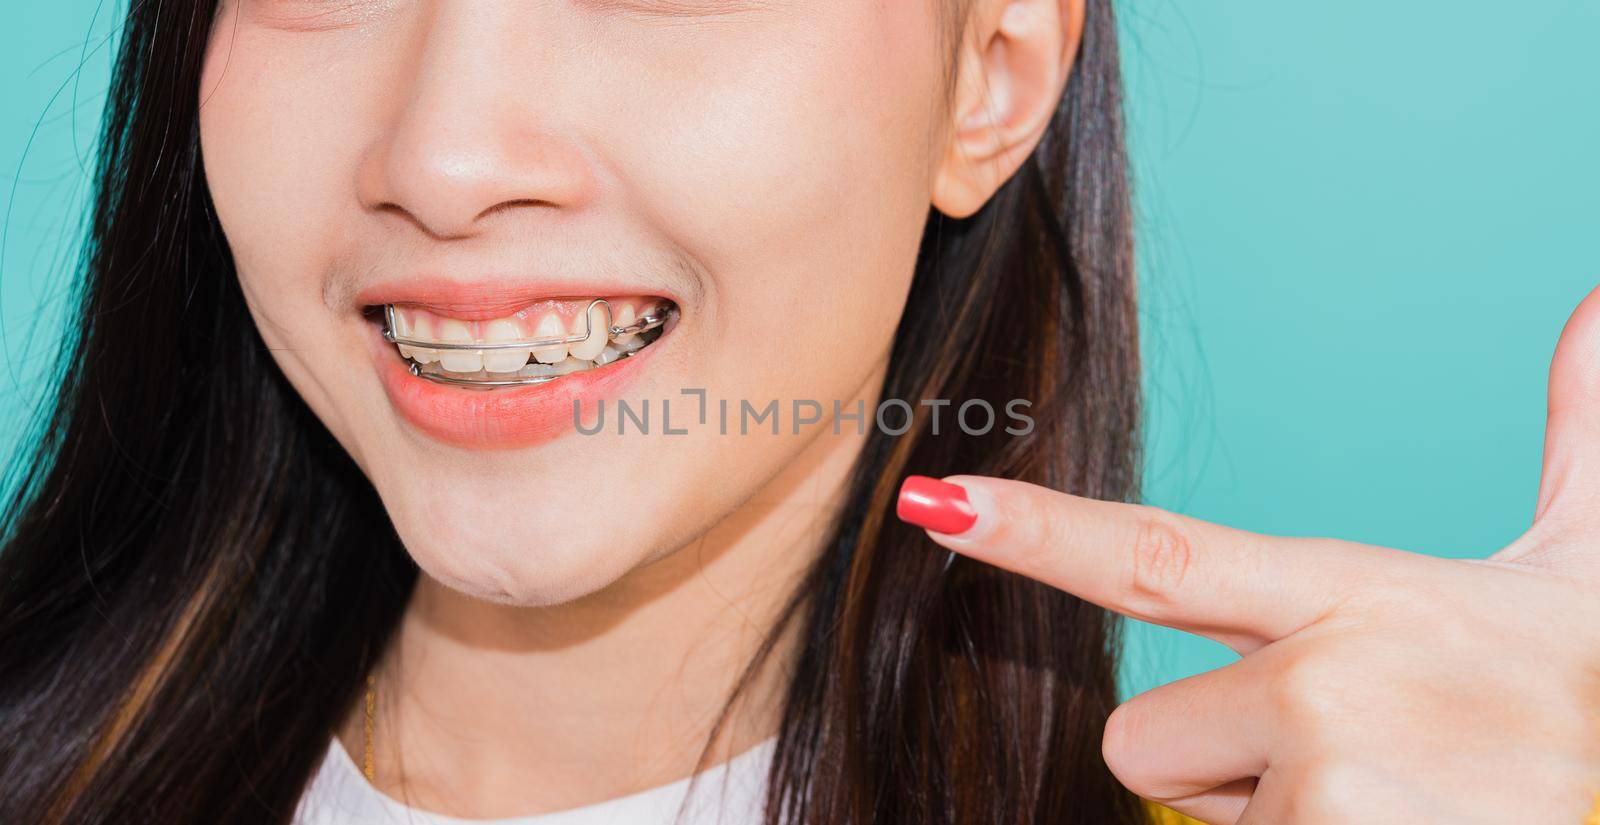 Asian beautiful young woman teen pointing finger to teeth, portrait of happy Thai female confident smiling show white teeth, studio shot isolated on blue background, Dental health care concept